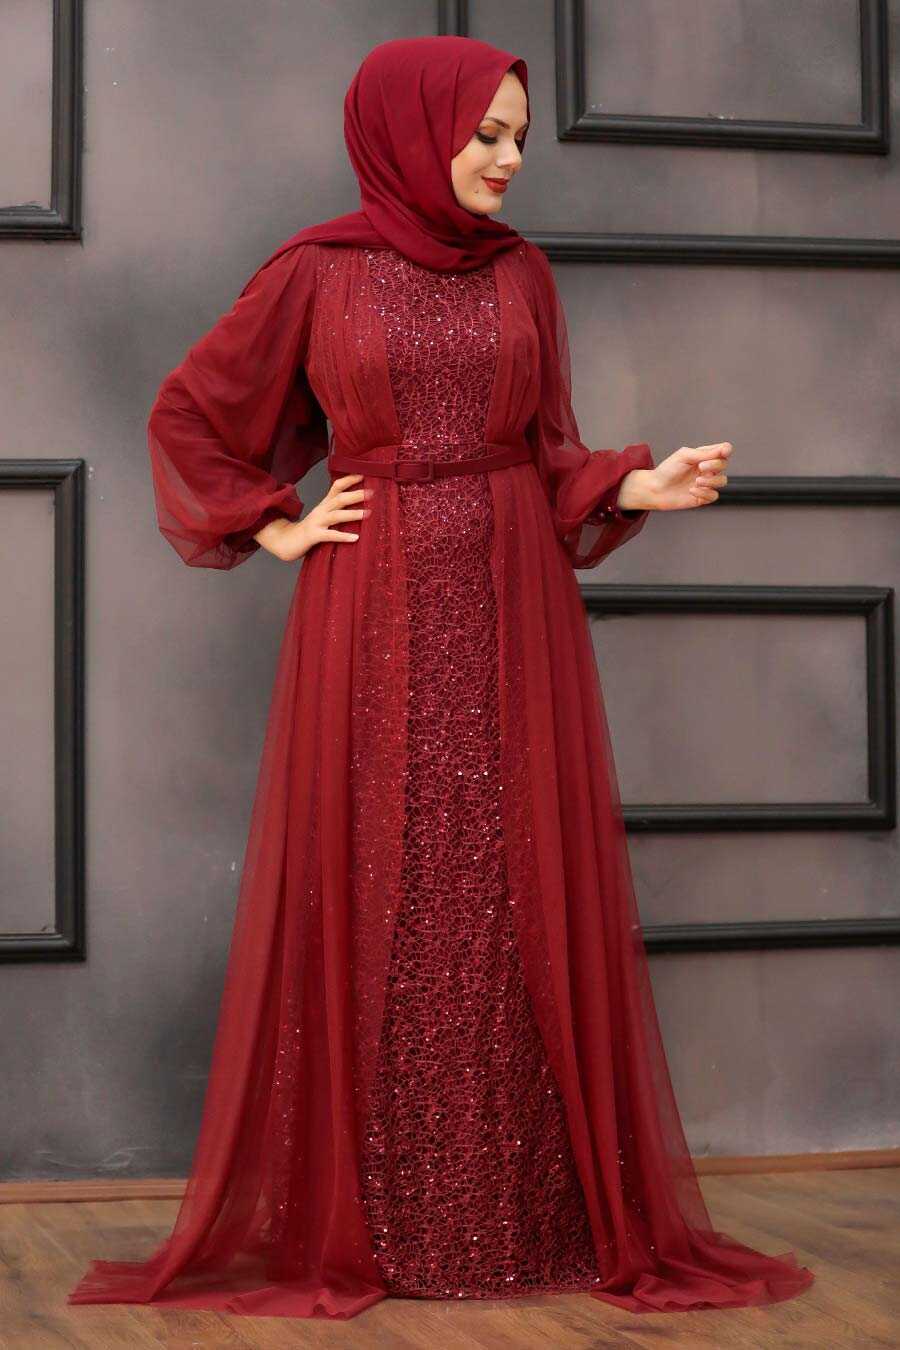 Neva Style - Luxorious Claret Red Islamic Evening Gown 5383BR